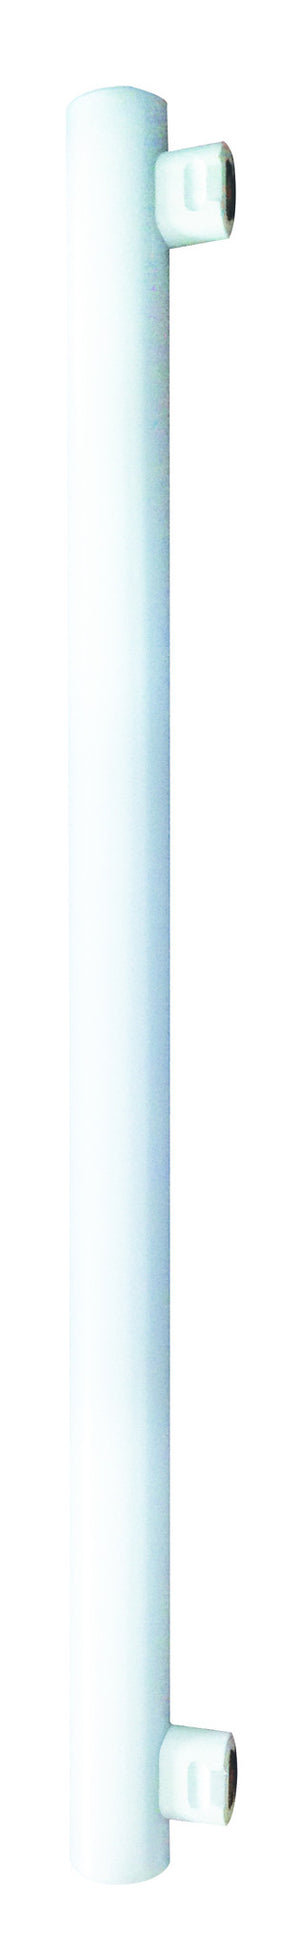 997009 - Tube Lateral LED S14S 500mm 12W 2700K 1100Lm GS TUBE The Lampco - The Lamp Company